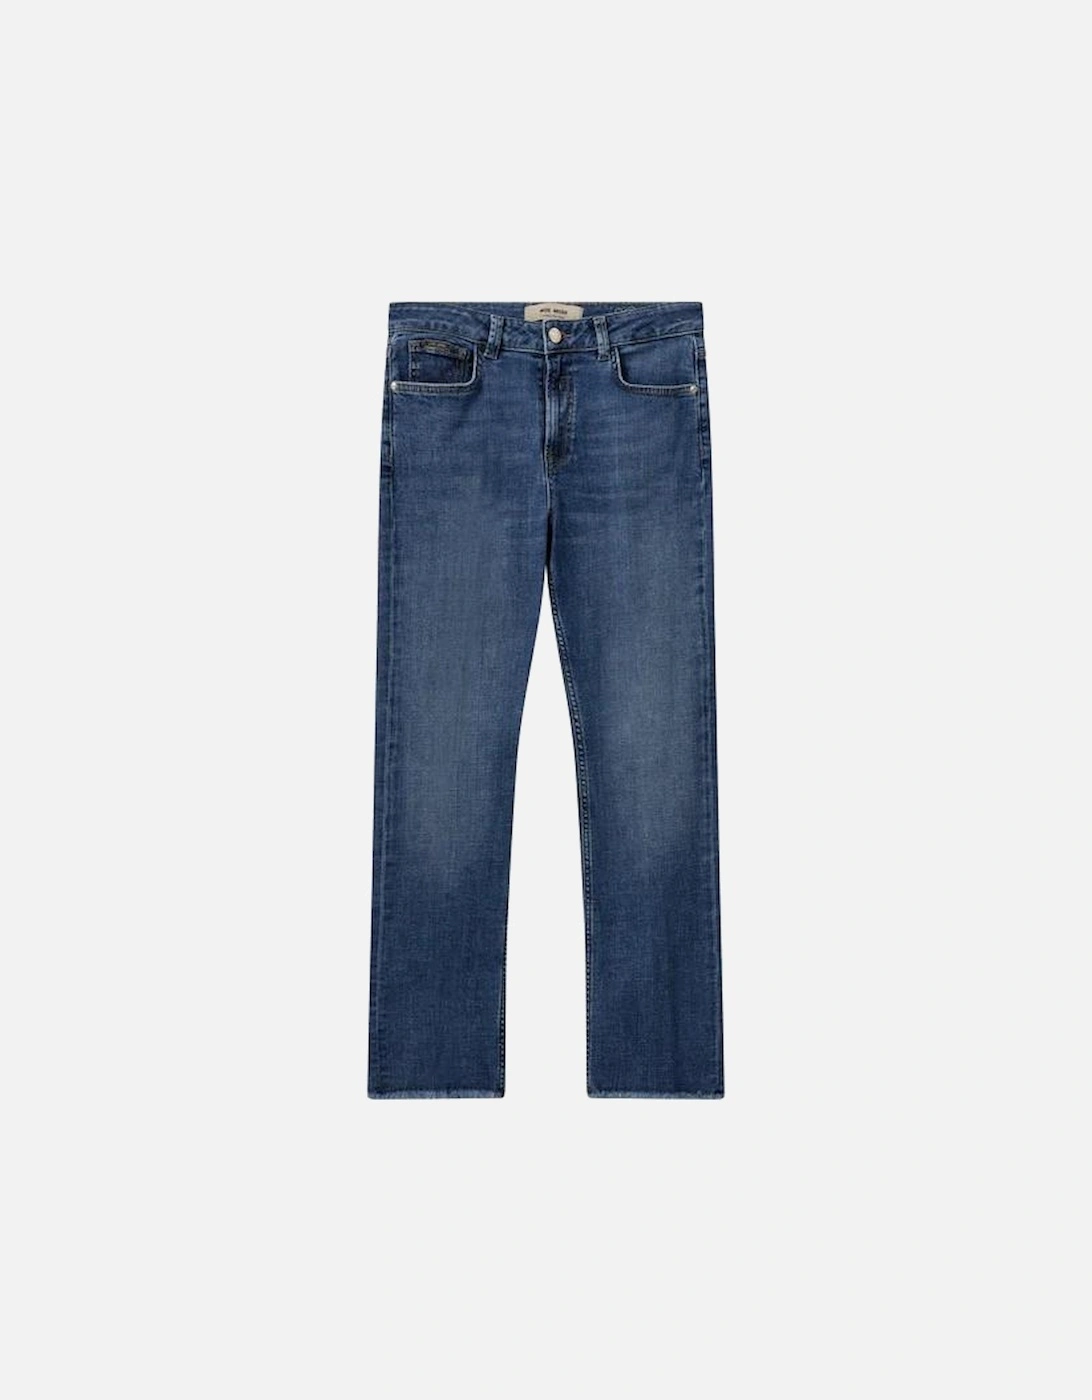 Everest Spring Ave jeans, 6 of 5